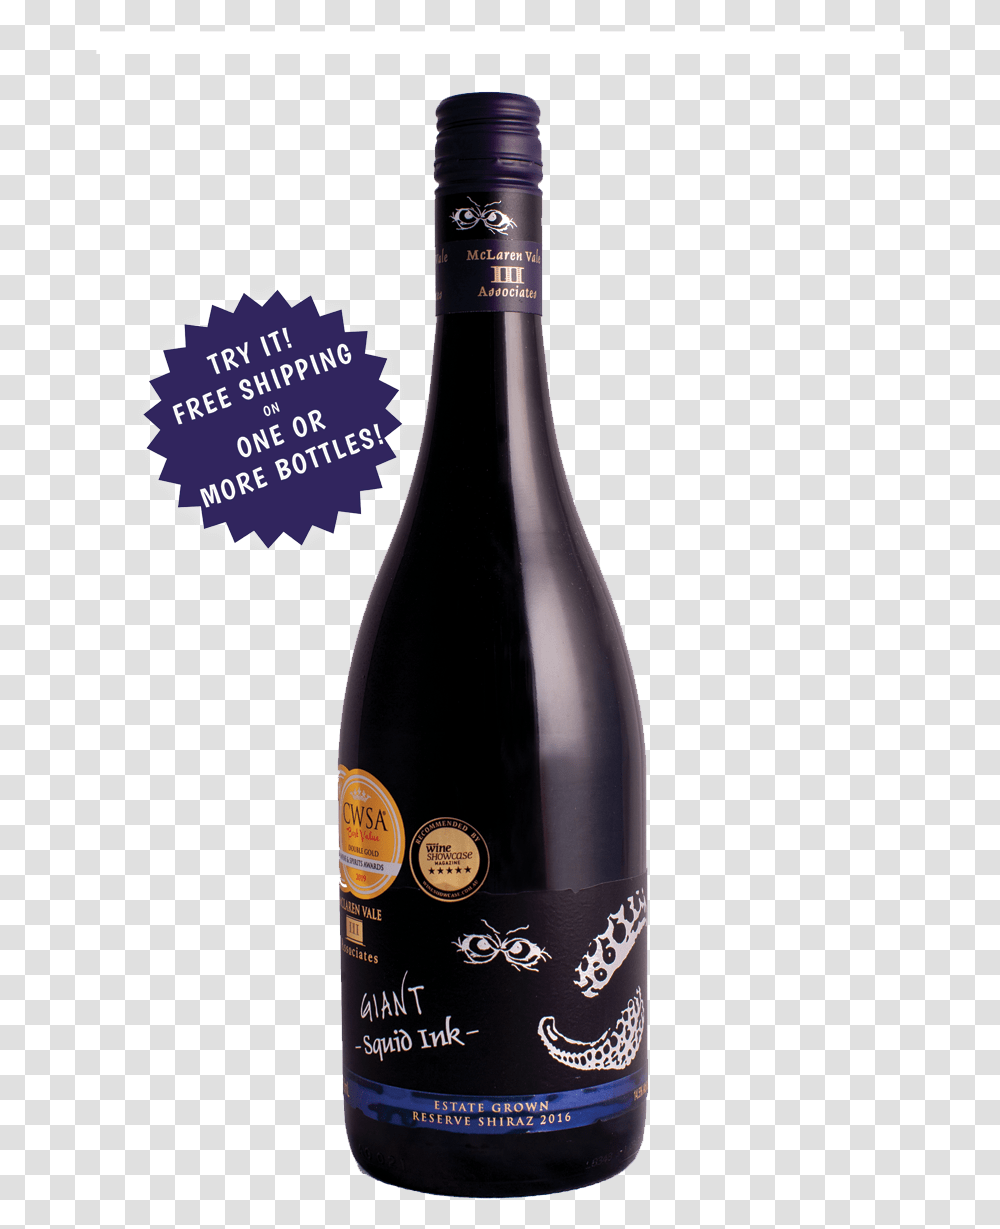 2016 Giant Squid Ink Shiraz New Release Double Gold Cwsa Wine, Alcohol, Beverage, Drink, Bottle Transparent Png